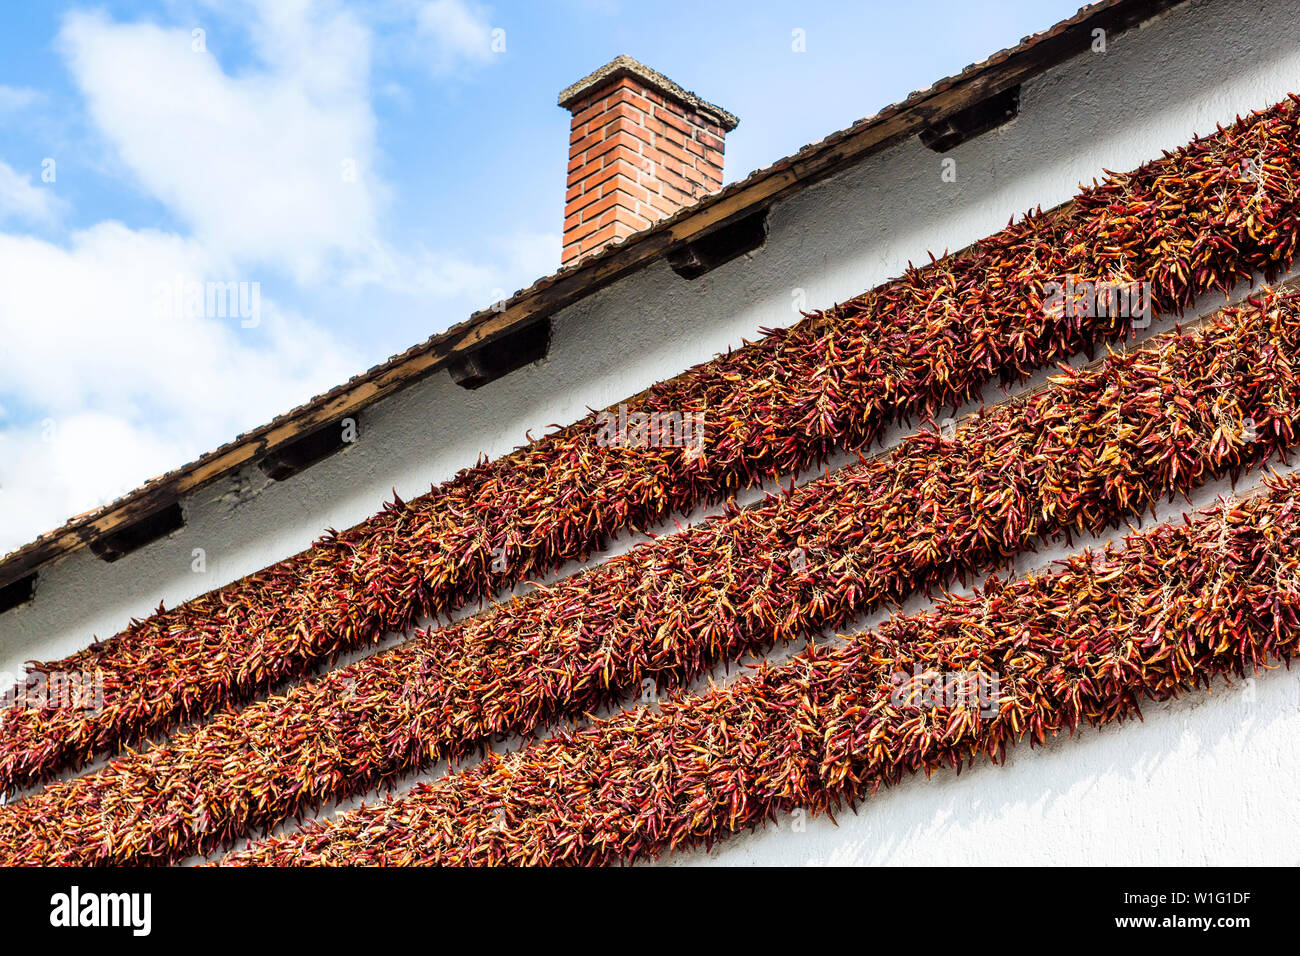 Red dried peppers on the side of a house, Hungary Stock Photo